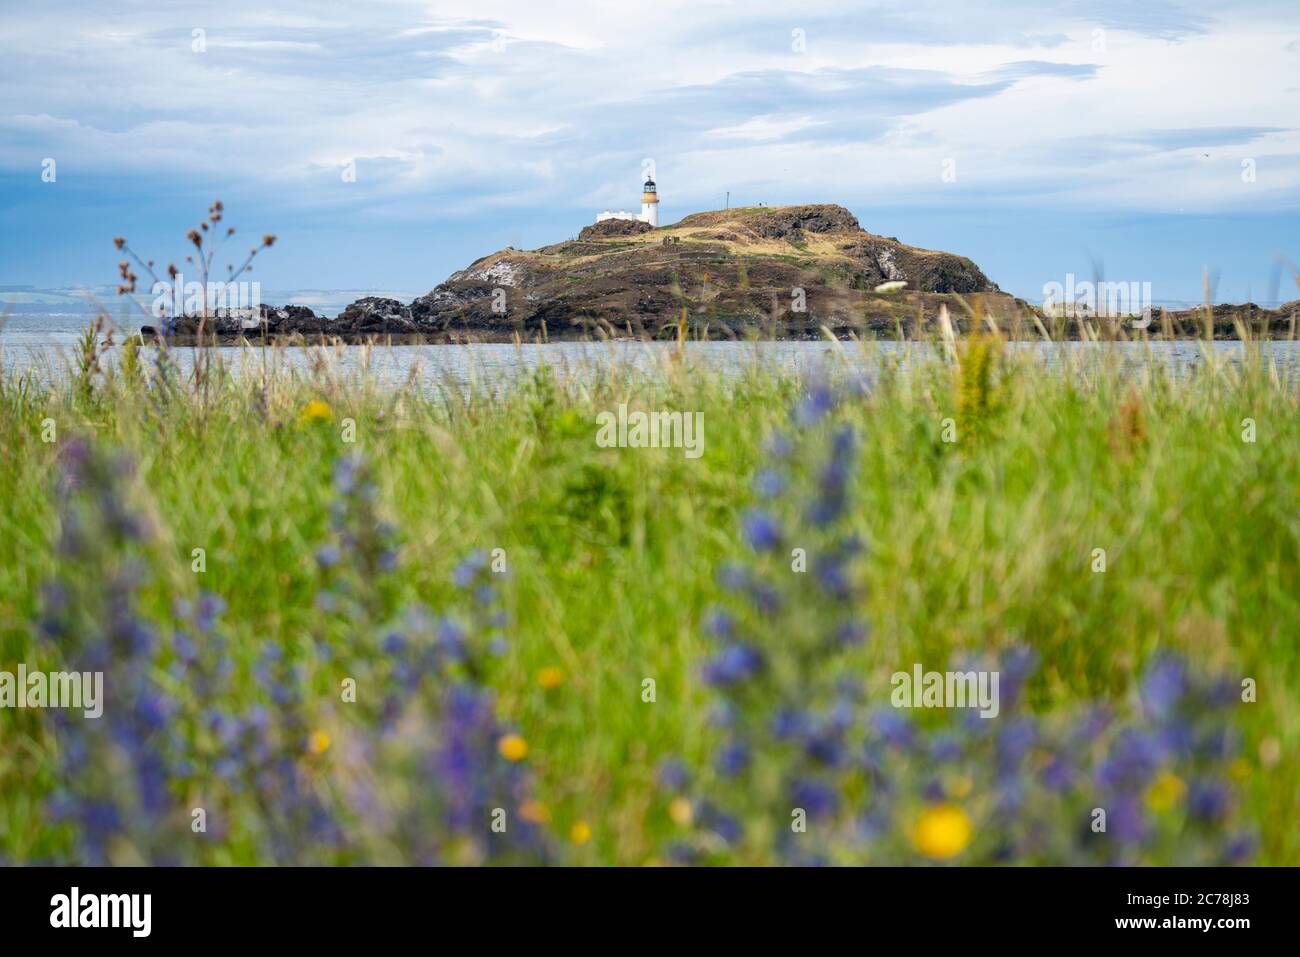 View of lighthouse on Fidra Island in Firth of Forth, off East Lothian coast, Scotland, UK Stock Photo